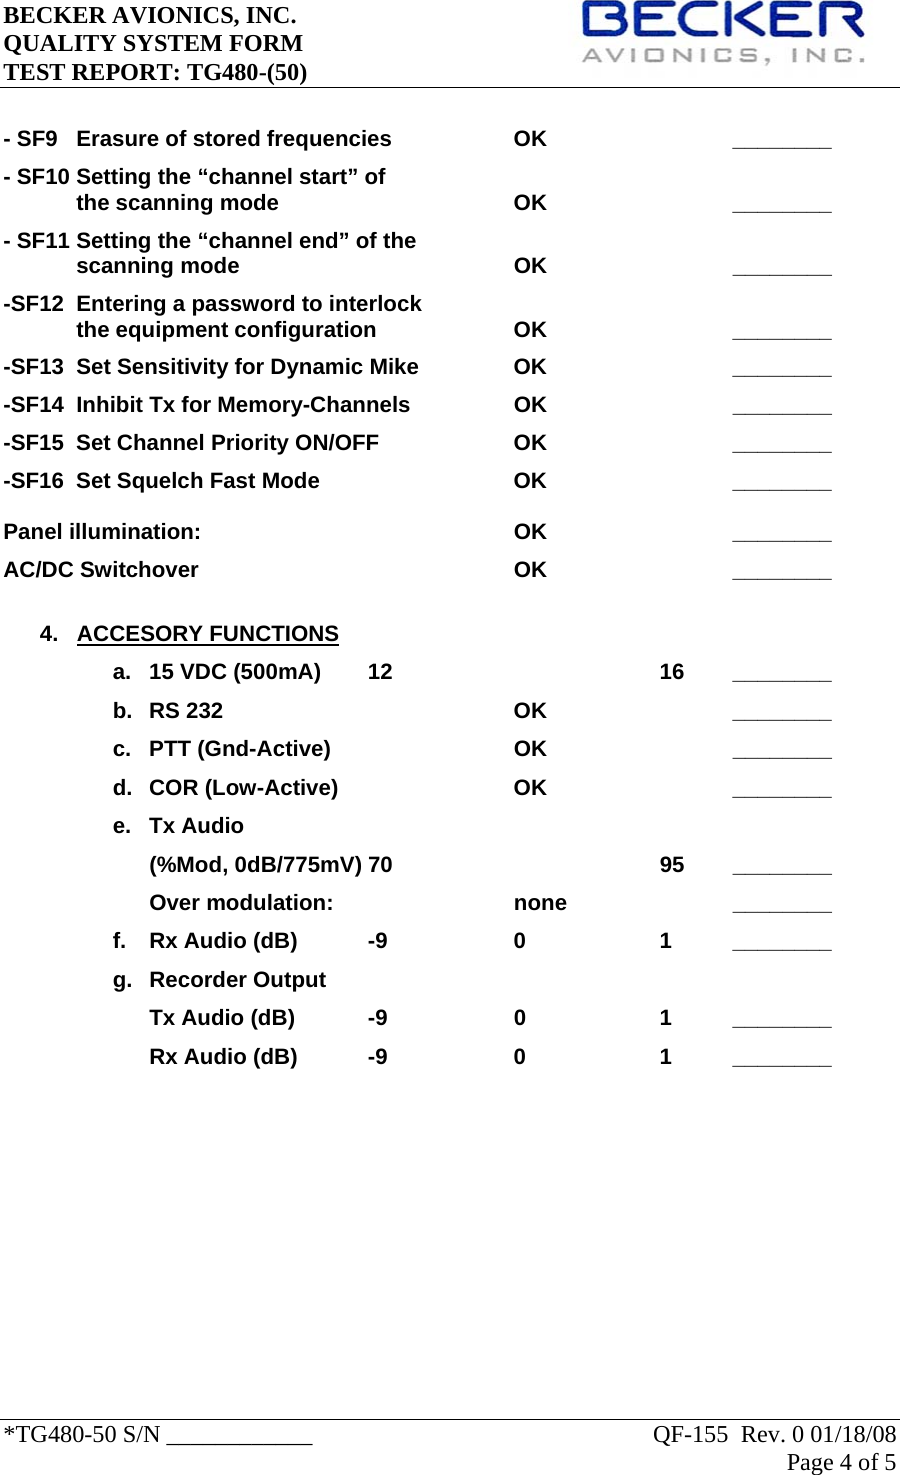 BECKER AVIONICS, INC.     QUALITY SYSTEM FORM TEST REPORT: TG480-(50)   *TG480-50 S/N ____________    QF-155  Rev. 0 01/18/08 Page 4 of 5    - SF9  Erasure of stored frequencies    OK      ________ - SF10 Setting the “channel start” of the scanning mode    OK   ________    - SF11 Setting the “channel end” of the  scanning mode    OK   ________ -SF12  Entering a password to interlock  the equipment configuration    OK      ________ -SF13  Set Sensitivity for Dynamic Mike    OK      ________ -SF14  Inhibit Tx for Memory-Channels    OK      ________ -SF15  Set Channel Priority ON/OFF    OK      ________ -SF16  Set Squelch Fast Mode      OK      ________  Panel illumination:     OK   ________ AC/DC Switchover     OK   ________  4.   ACCESORY FUNCTIONS a.  15 VDC (500mA)  12        16  ________ b. RS 232    OK   ________ c. PTT (Gnd-Active)   OK   ________ d. COR (Low-Active)   OK   ________ e. Tx Audio  (%Mod, 0dB/775mV) 70    95 ________ Over modulation:   none   ________ f.  Rx Audio (dB)  -9    0    1  ________ g. Recorder Output Tx Audio (dB)  -9    0    1  ________ Rx Audio (dB)  -9    0    1  ________              